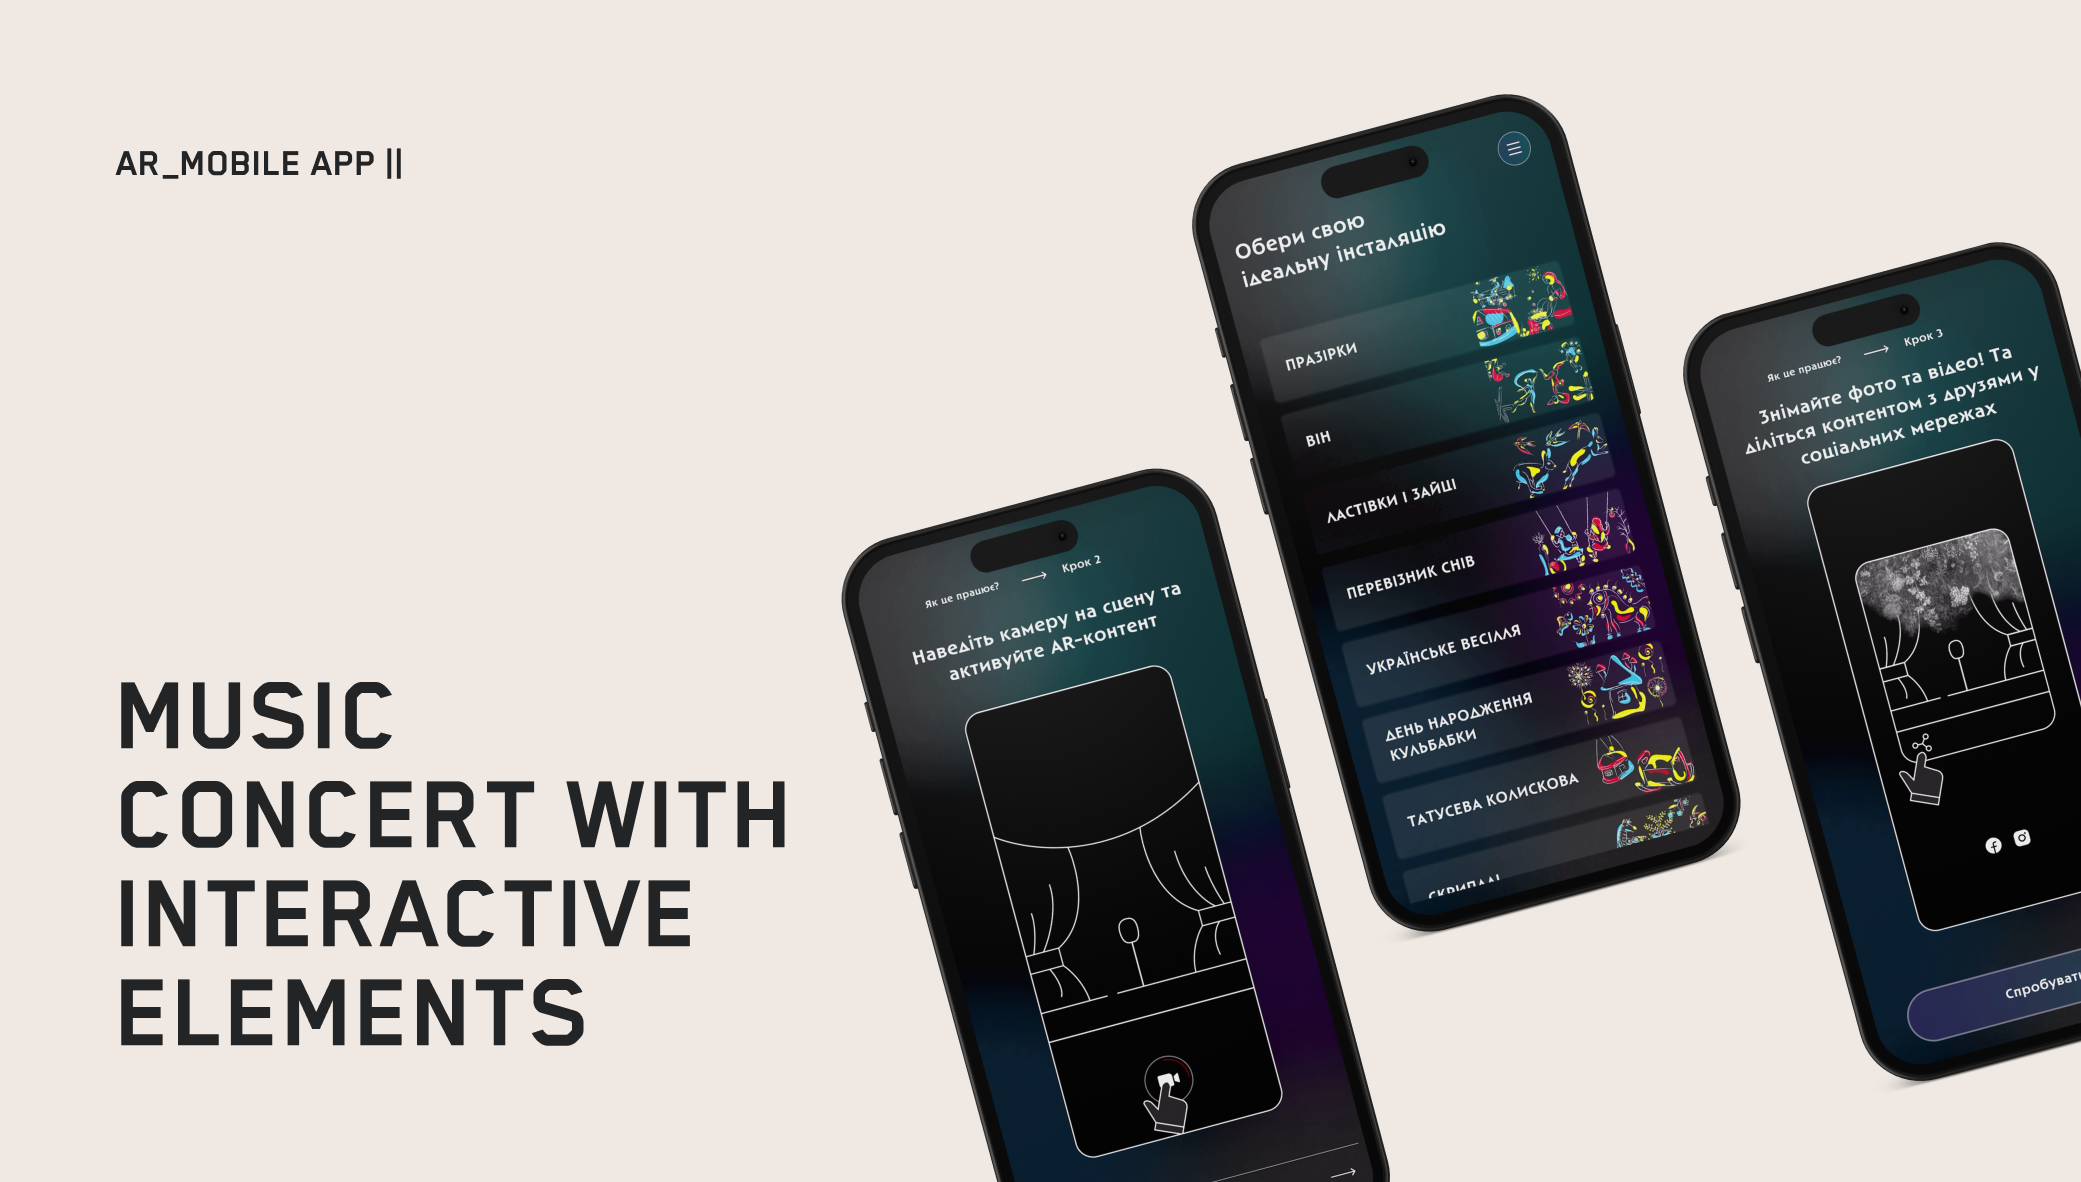 AR_MOBILE APP || MUSIC CONCERT WITH INTERACTIVE ELEMENTS